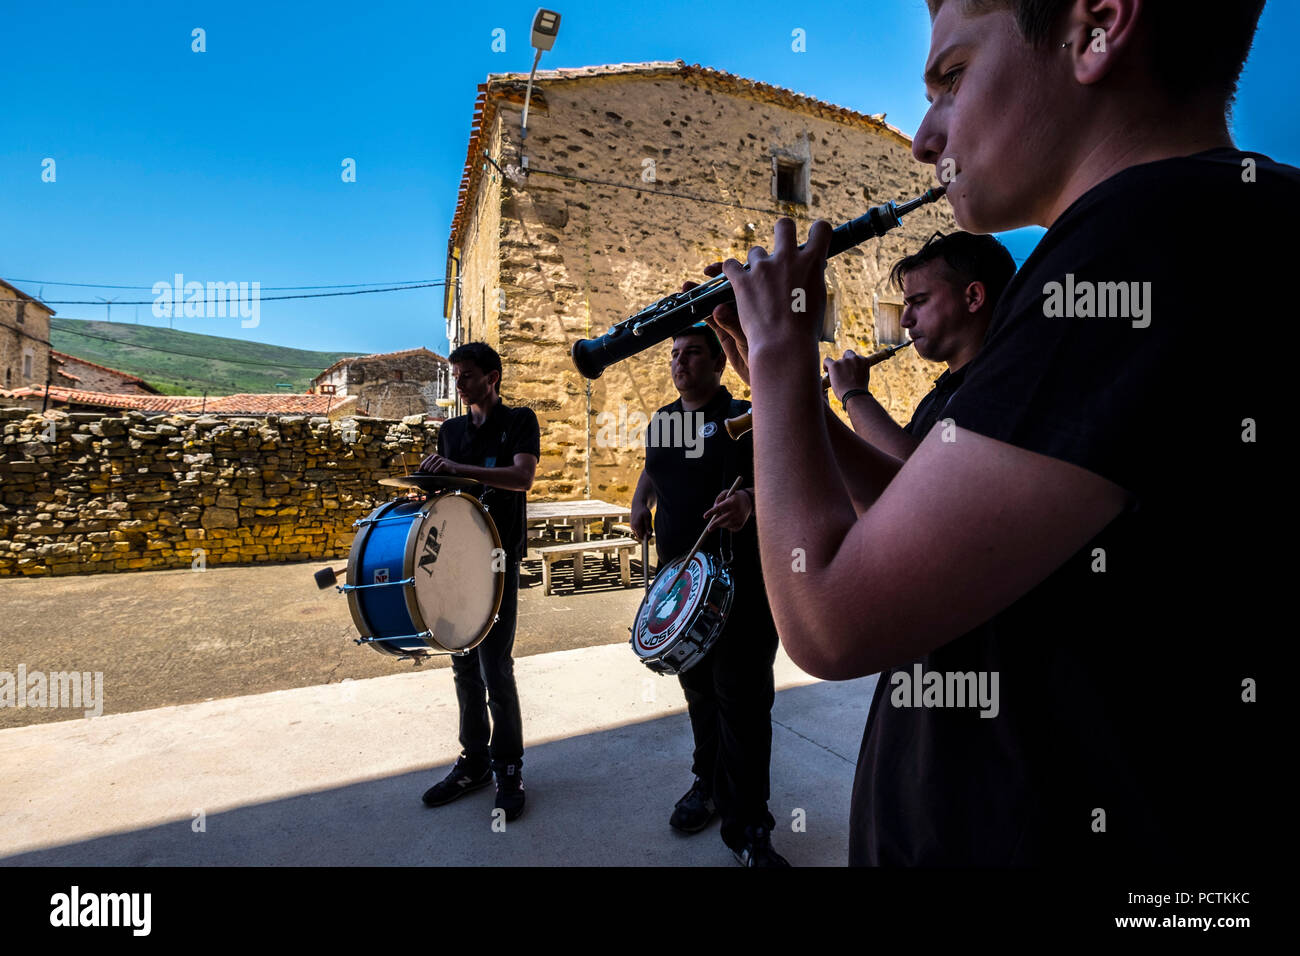 Soria, Spain - June 10, 2017, Popular party at the end of a transhumant sheep route in a small rural town of Soria in Spain Stock Photo